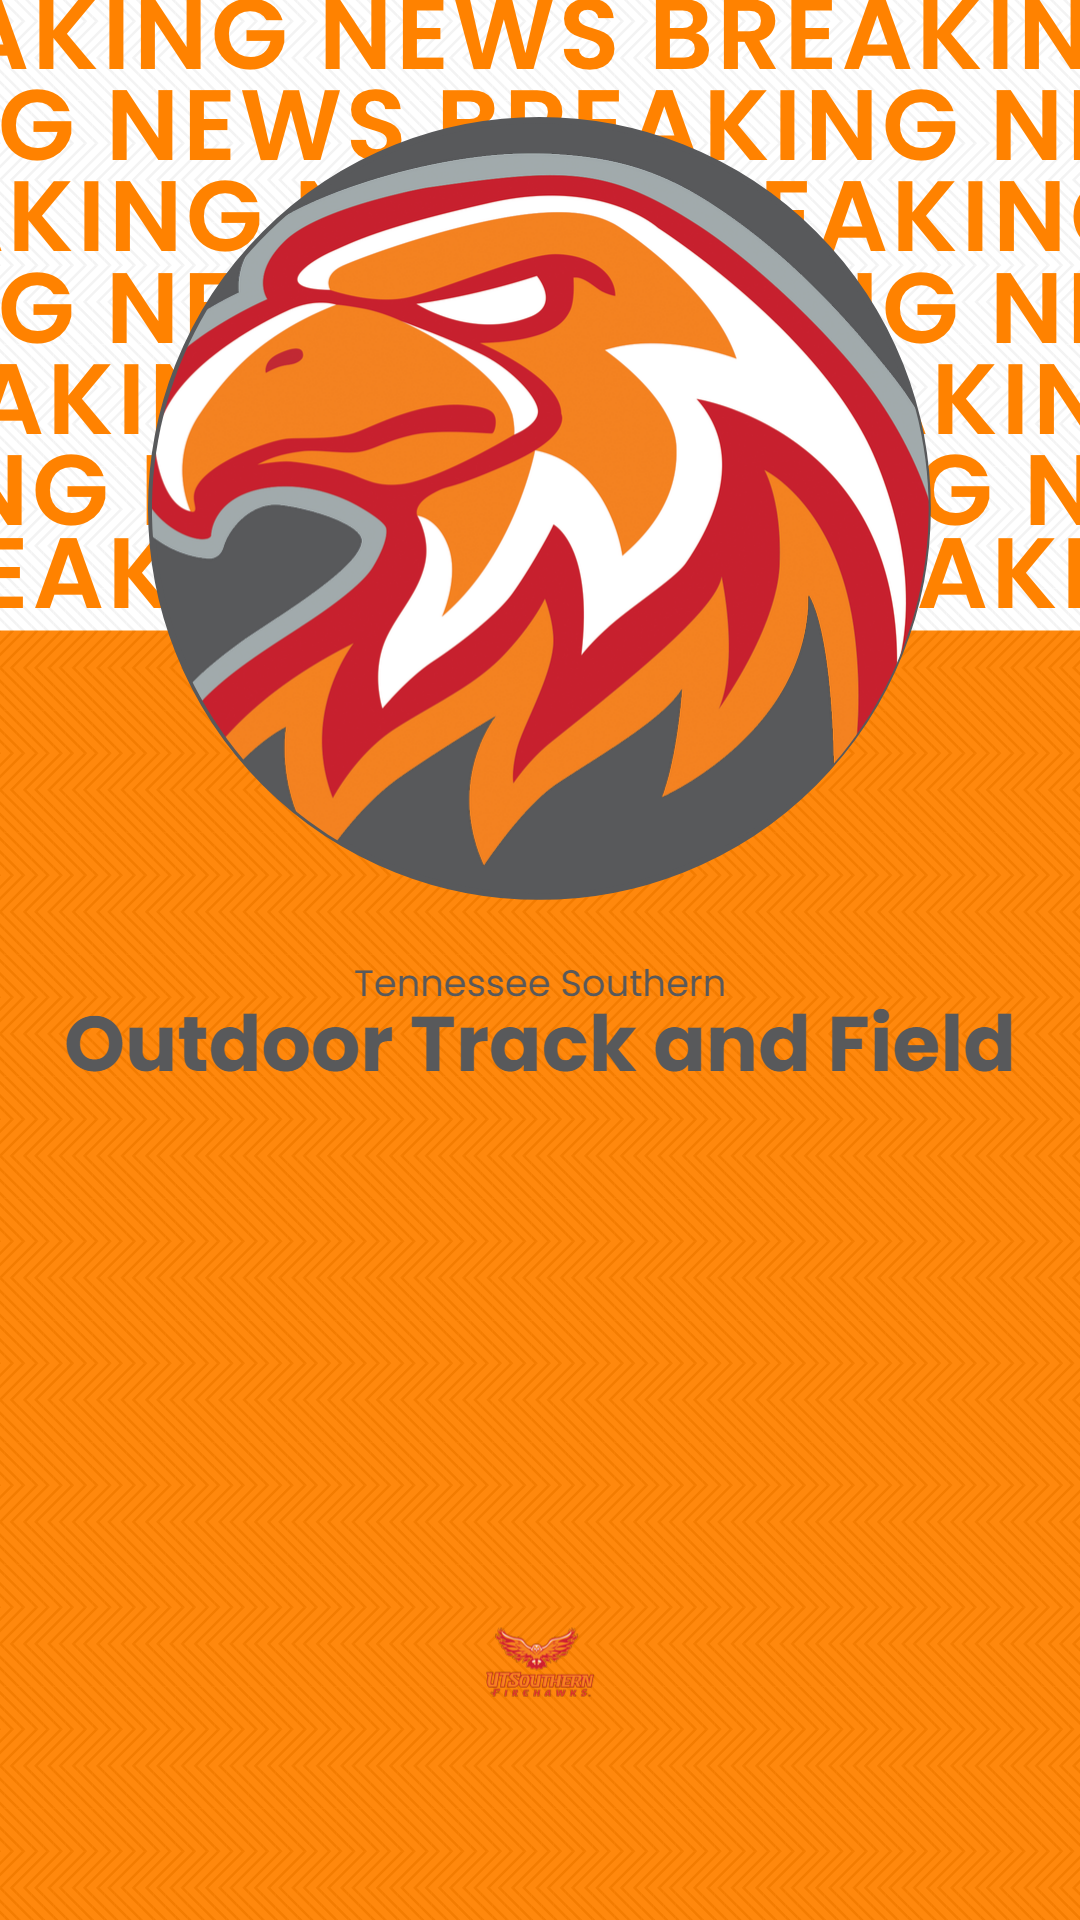 Tennessee Southern Adding Outdoor Track and Field Programs